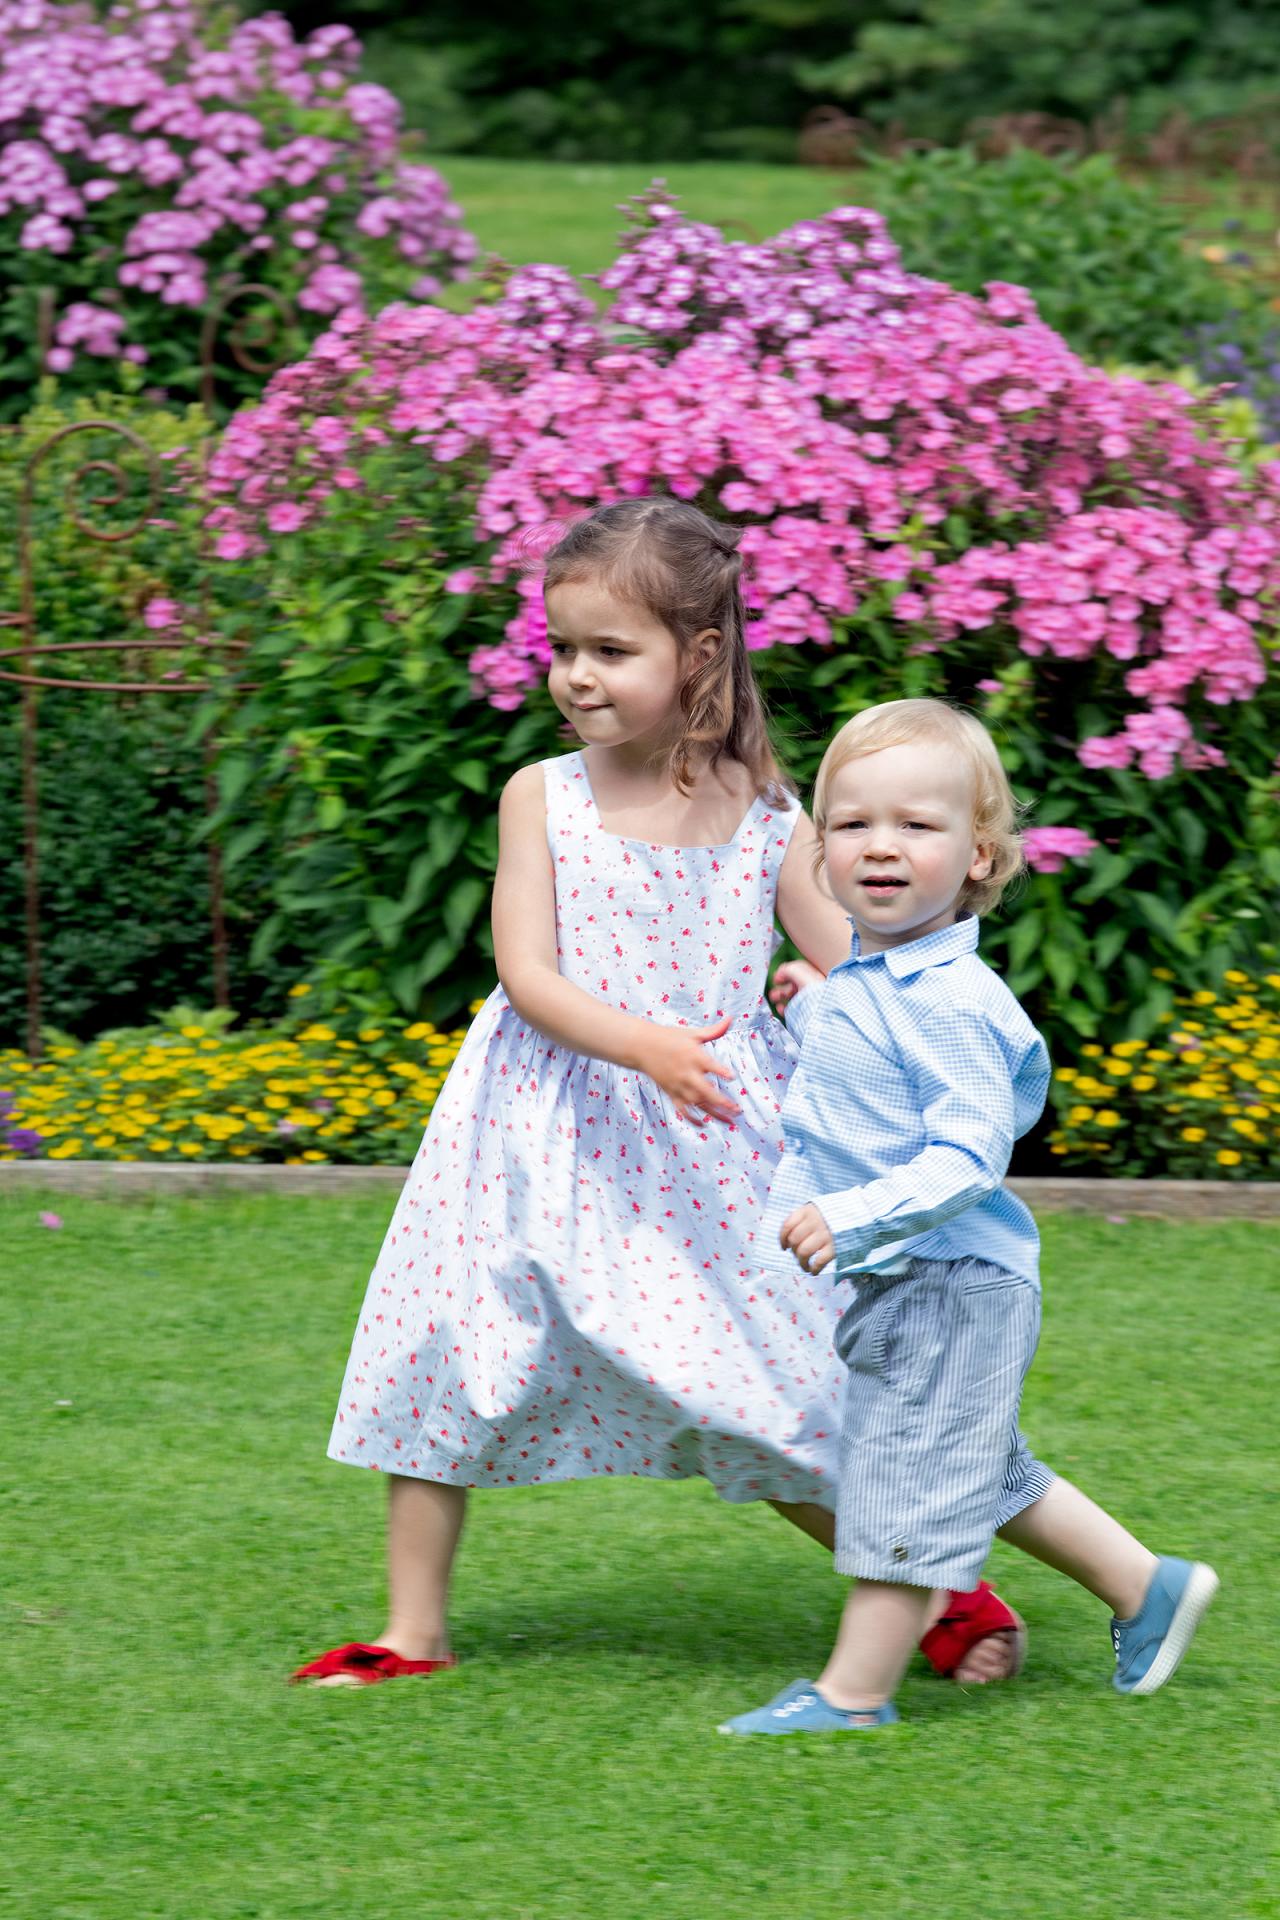 Princess Amalia and Prince Liam play in the gardens of Berg Castle